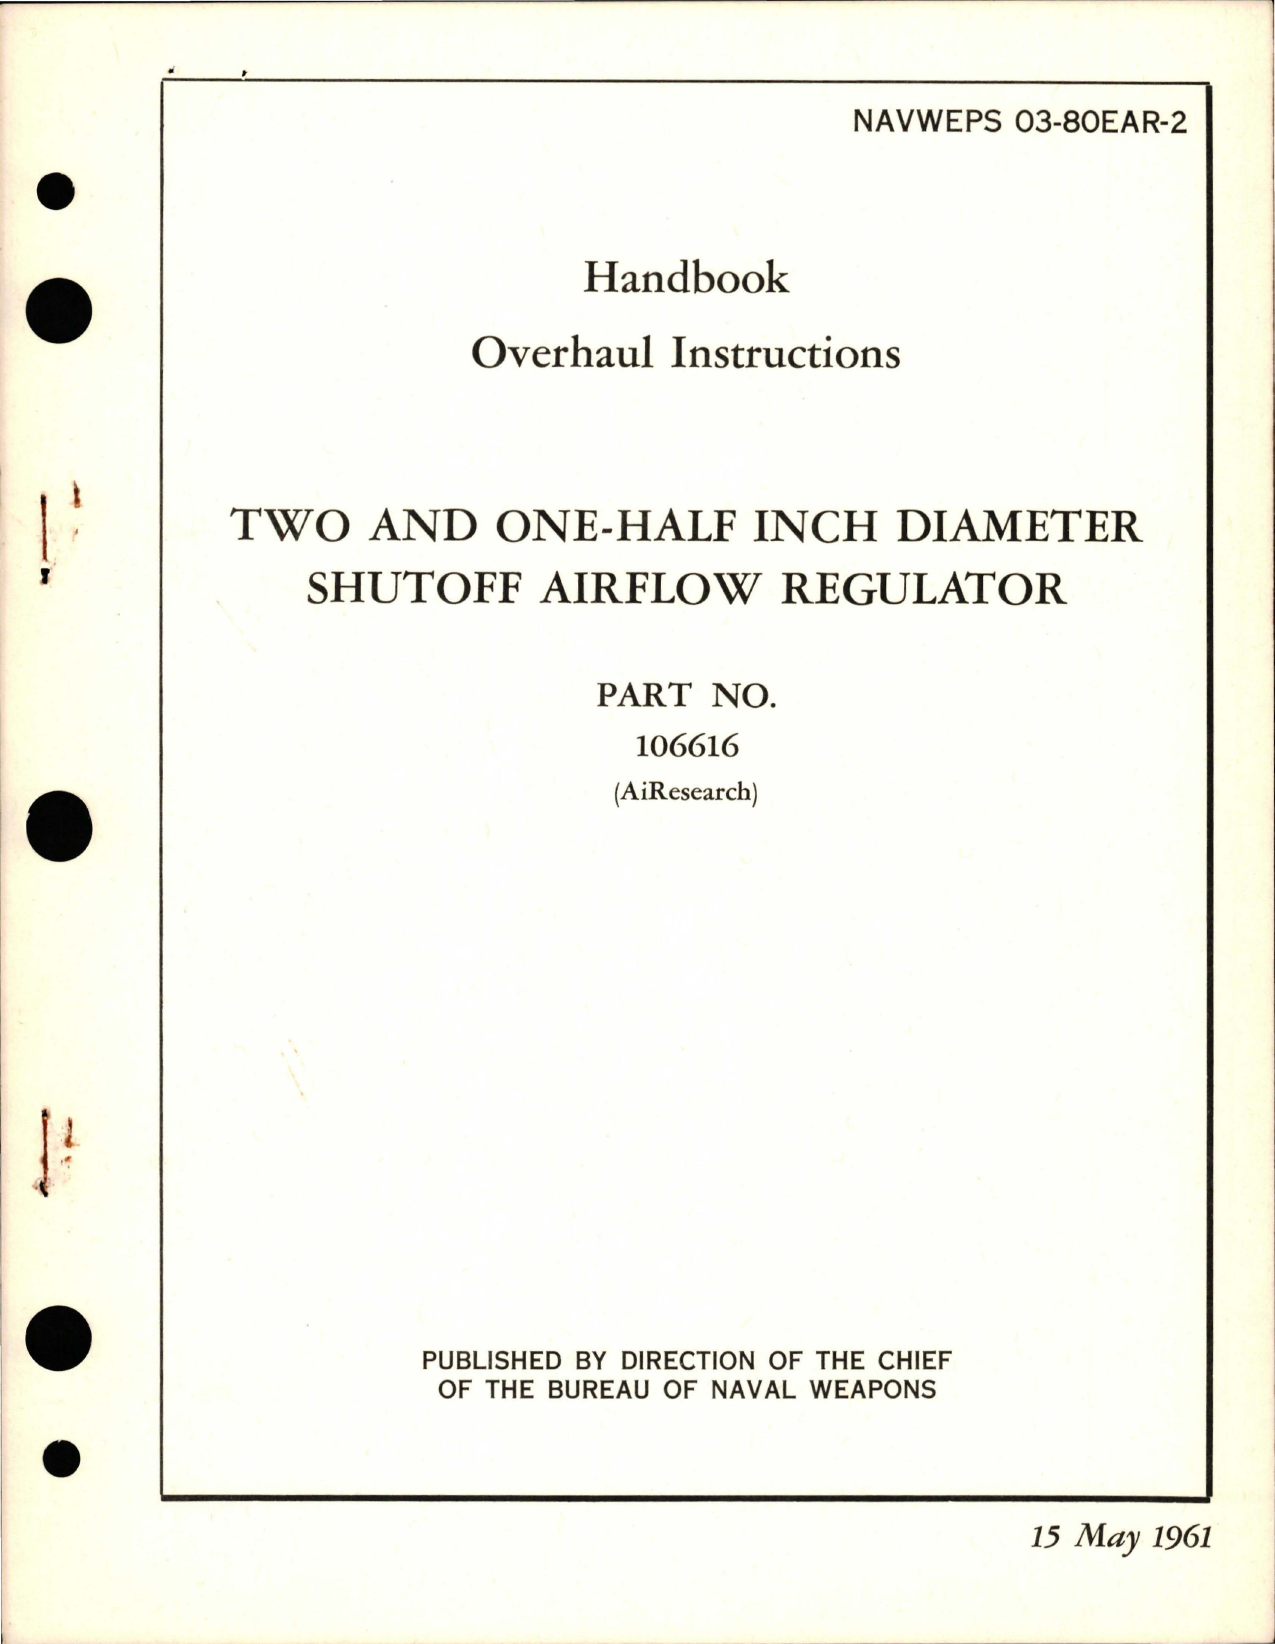 Sample page 1 from AirCorps Library document: Overhaul Instructions for Two and One-Half Inch Diameter Shutoff Airflow Regulator - Part 106616